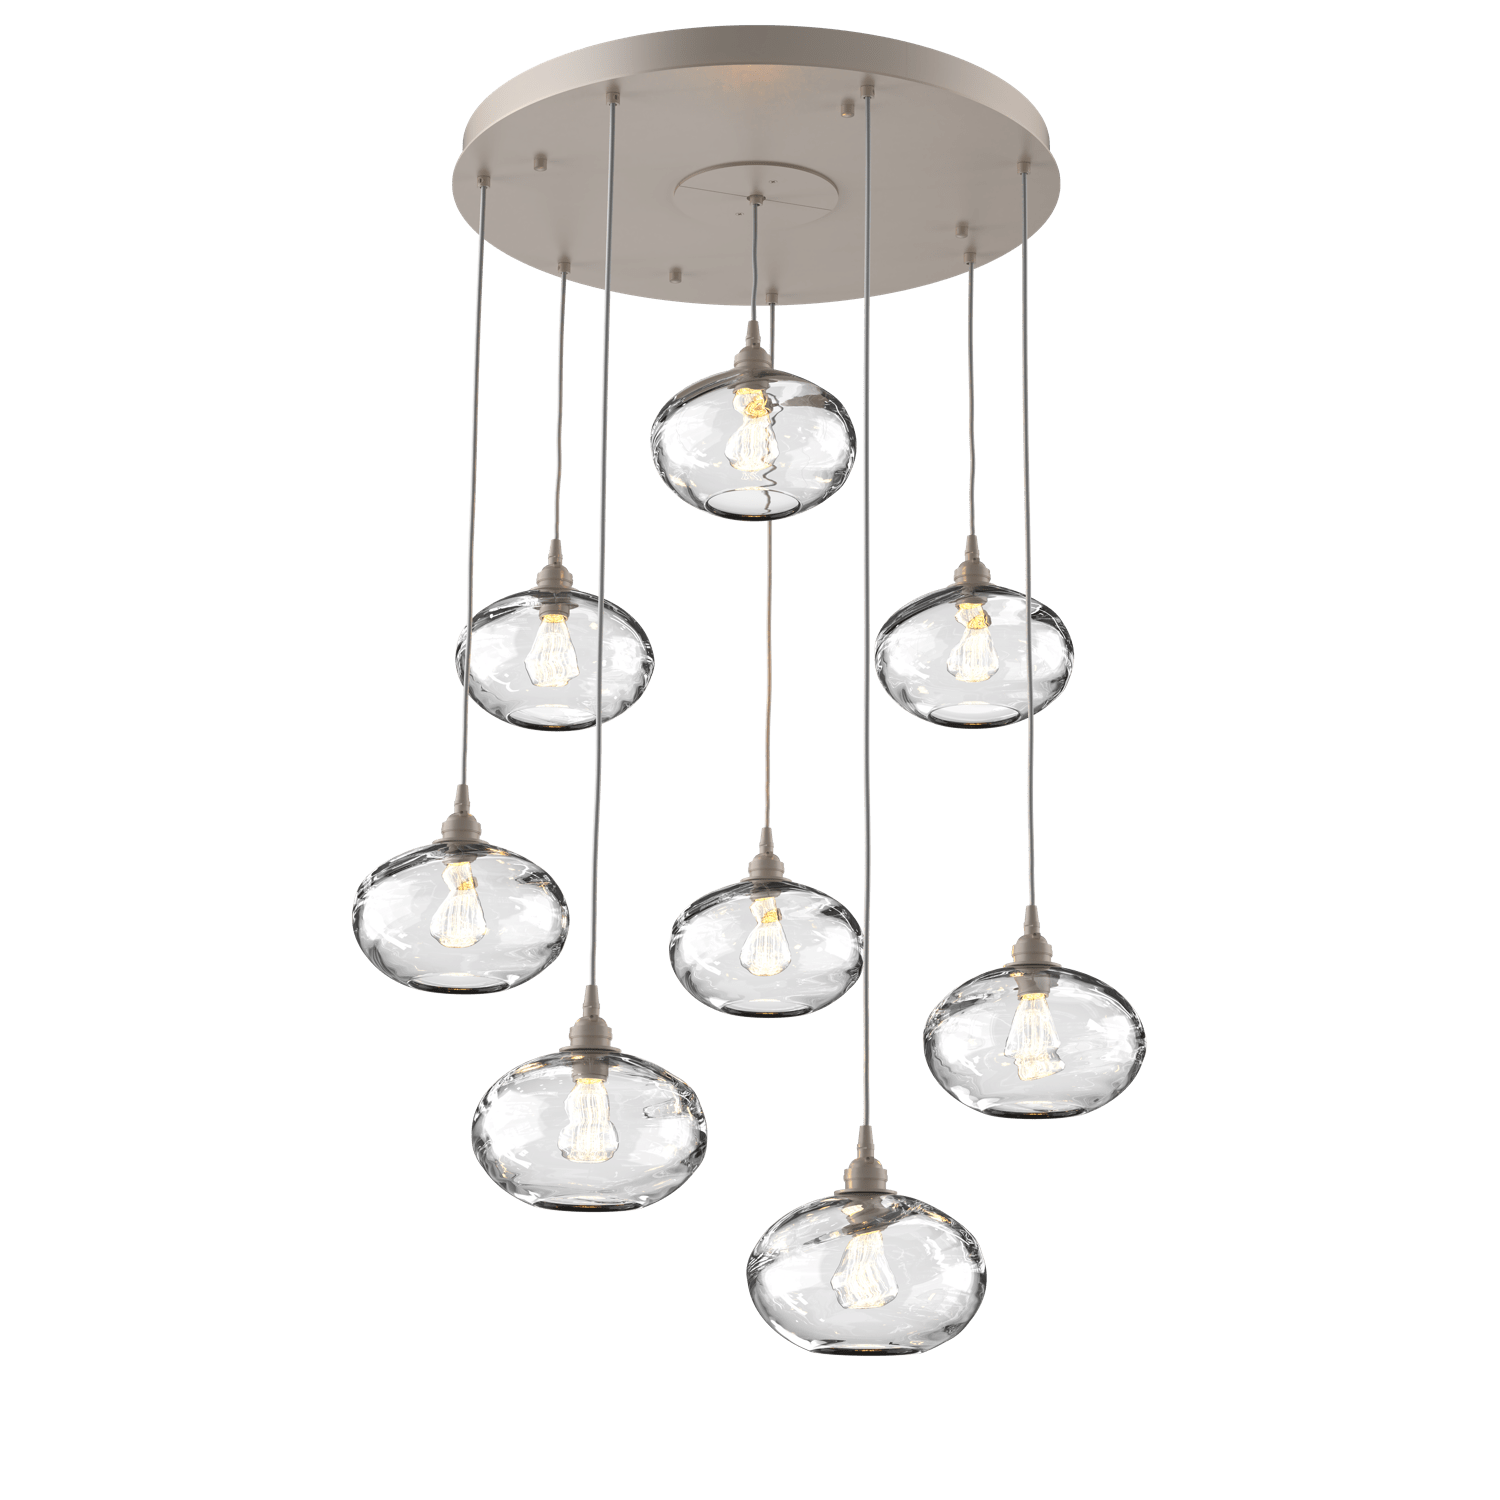 CHB0036-08-BS-OC-Hammerton-Studio-Optic-Blown-Glass-Coppa-8-light-round-pendant-chandelier-with-metallic-beige-silver-finish-and-optic-clear-blown-glass-shades-and-incandescent-lamping